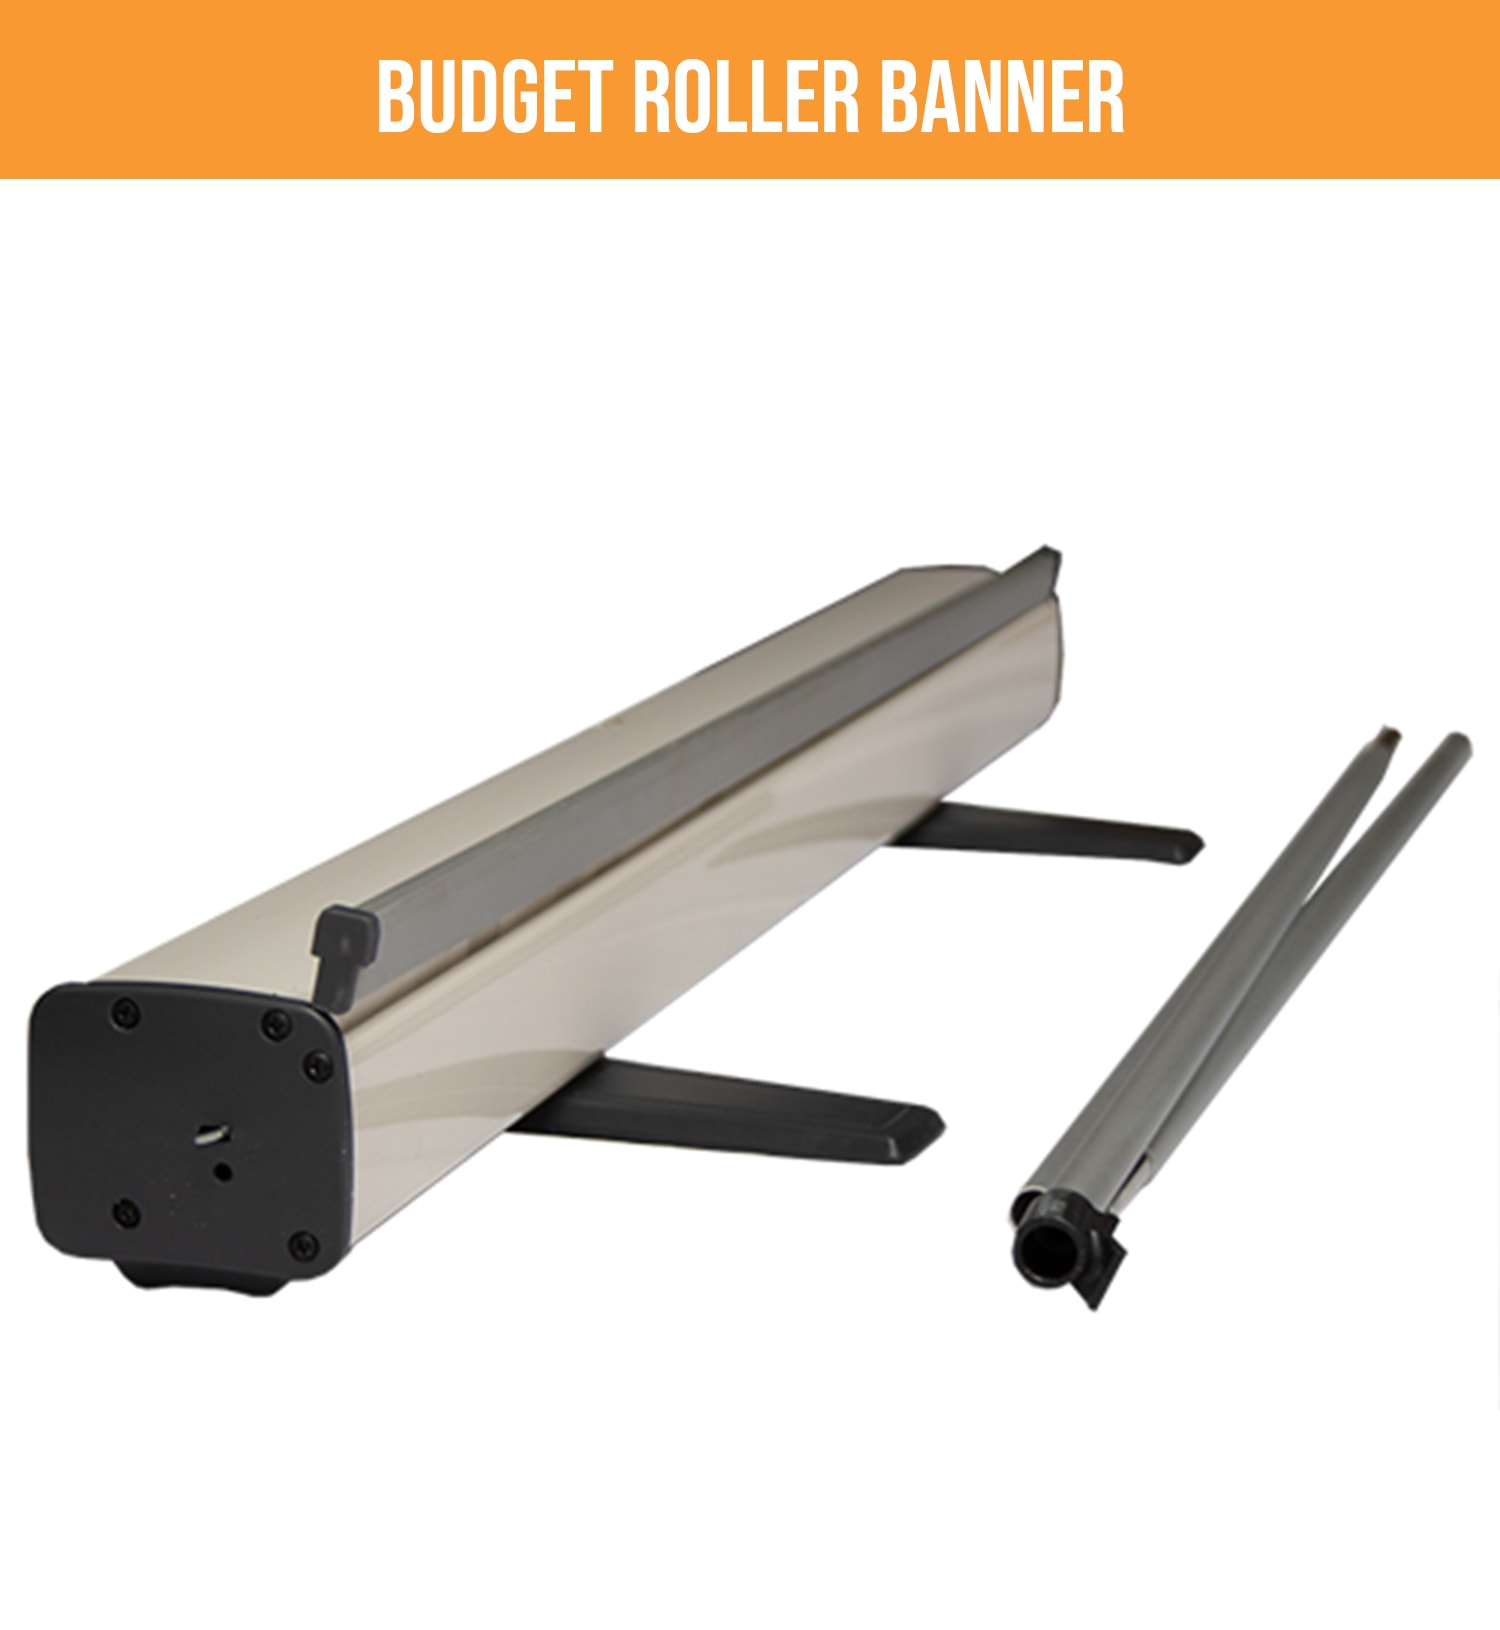 Budget Roller Banner stand and poles, ready for quick setup.